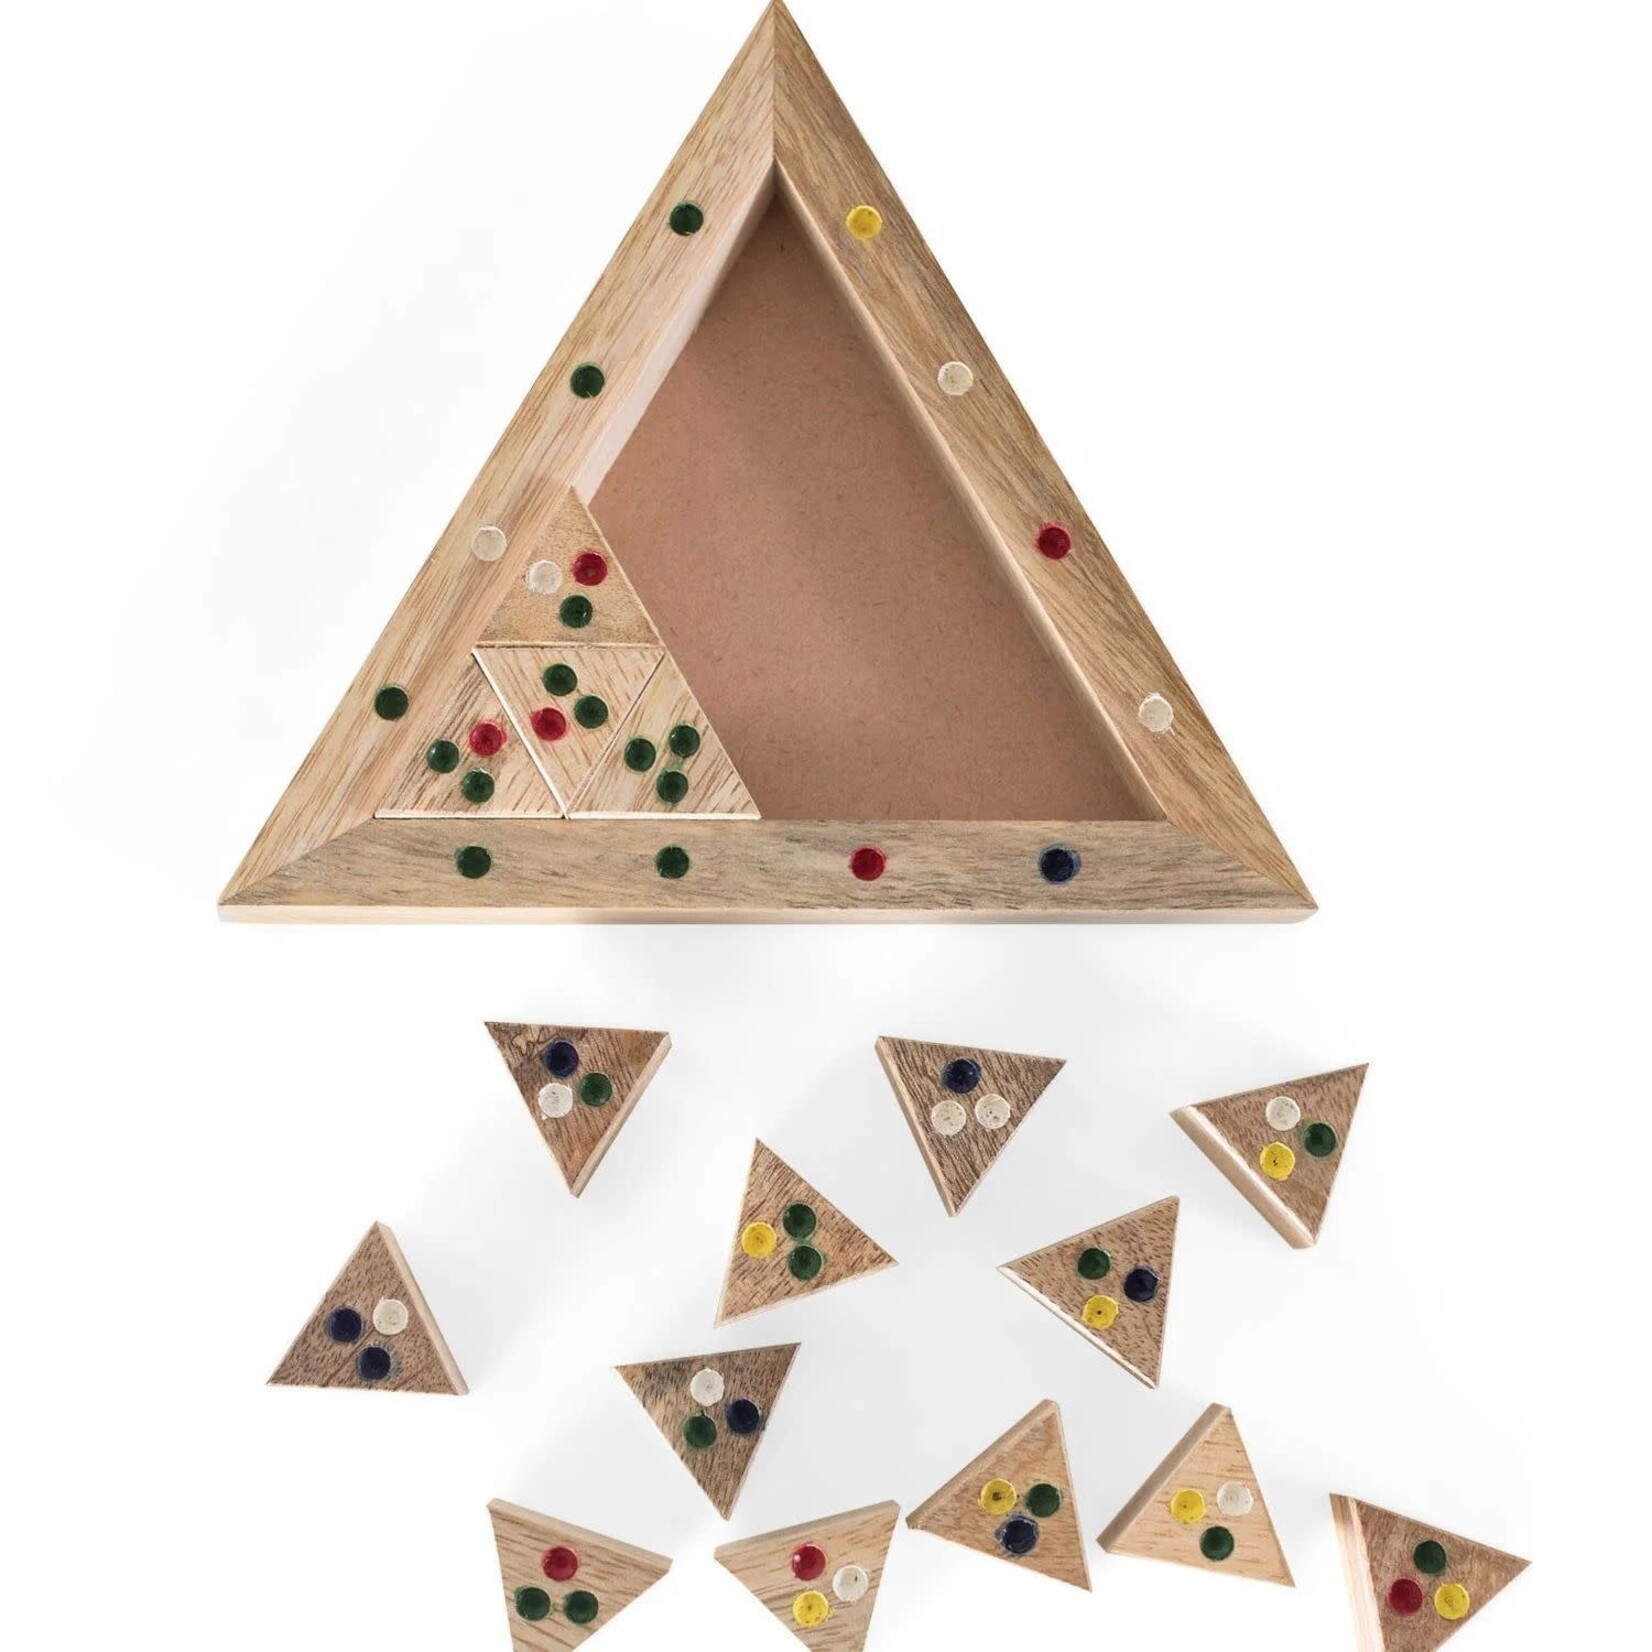 India Game Triangle Match Puzzle Wood 7X7 Brn/